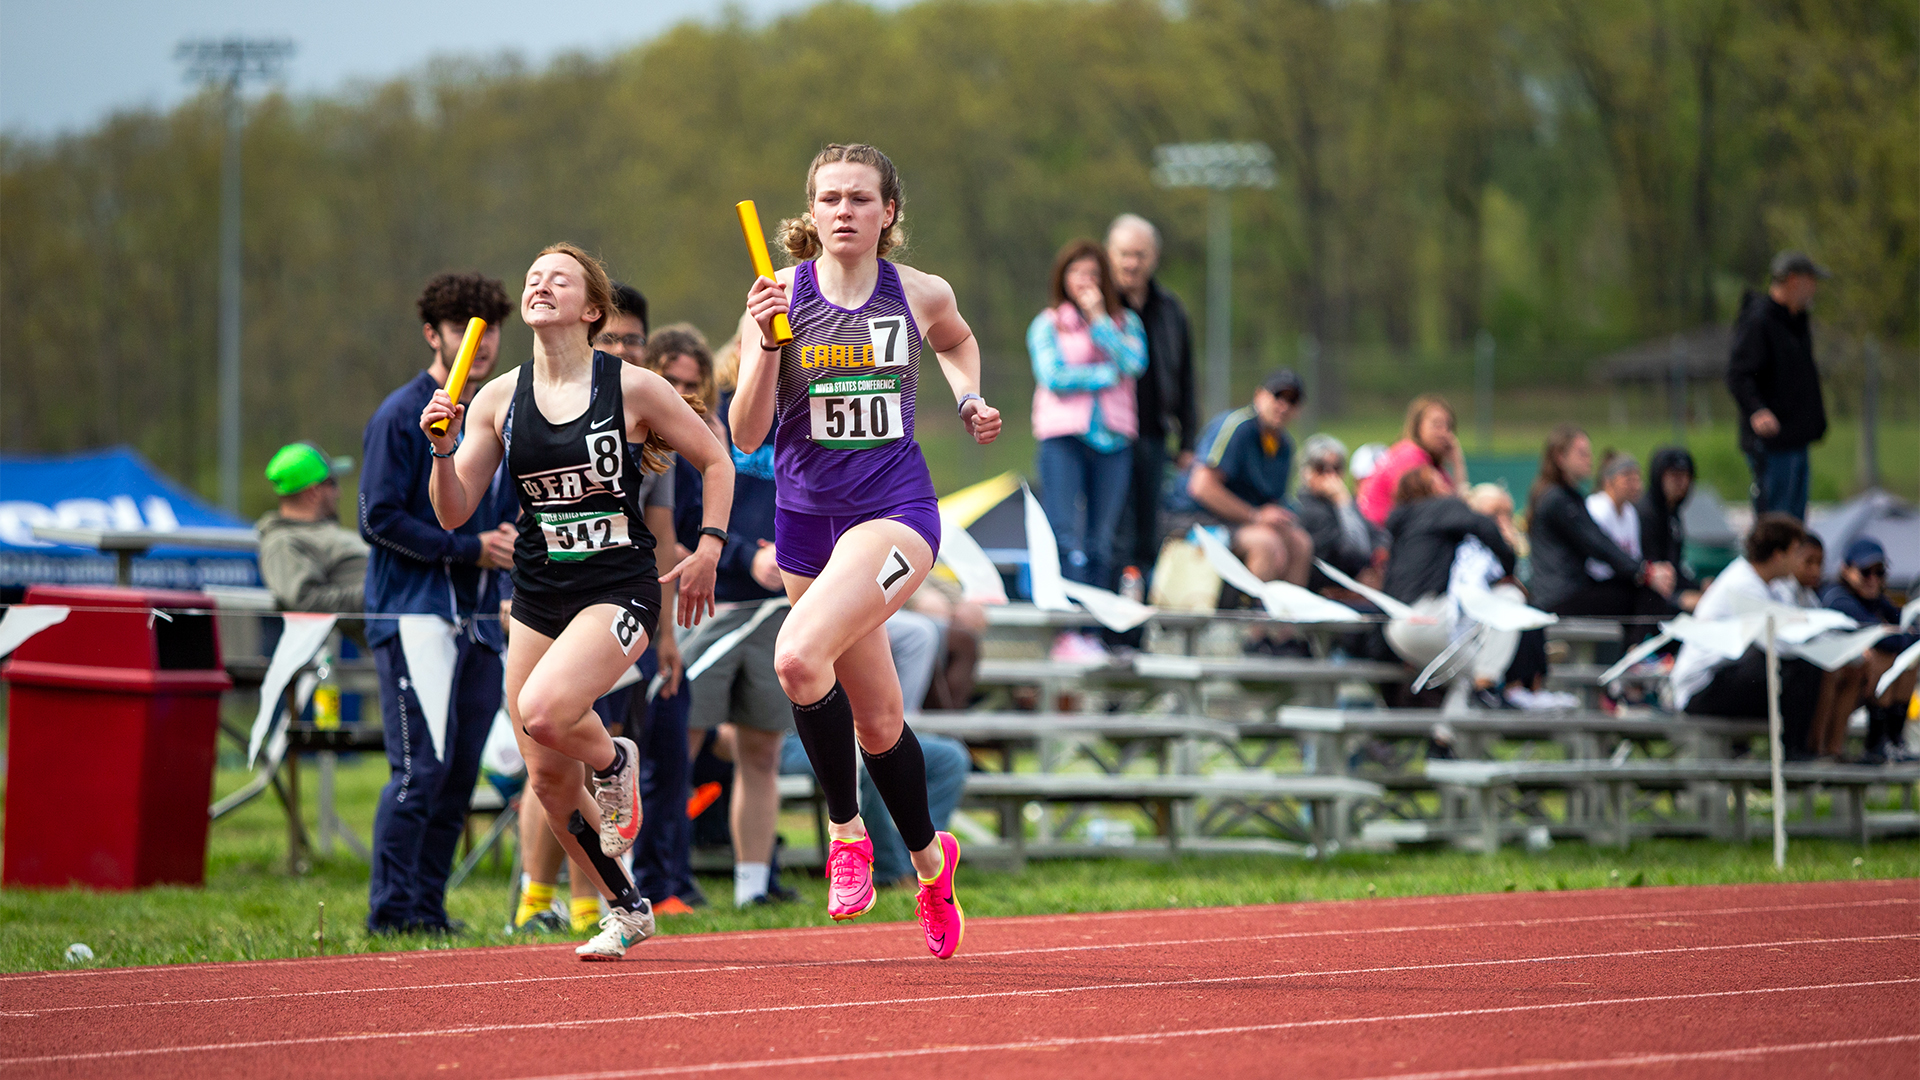 Ella Cloak helped the Celtics to a second-place finish in the 4x400 relay. Archived photo by William Conley.